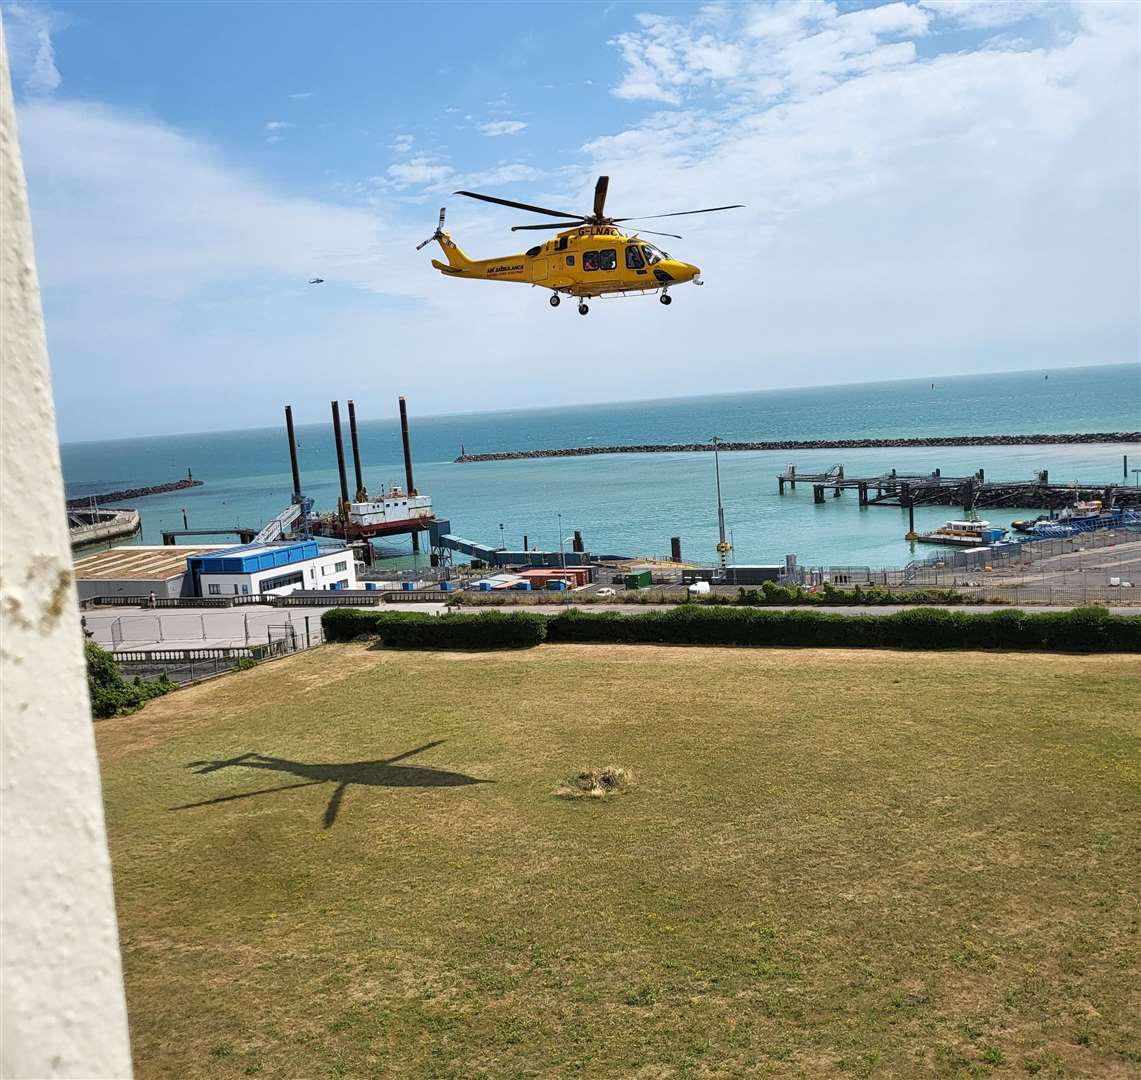 A medical professional was winched down to administer CPR. Picture: Lisa Elvidge